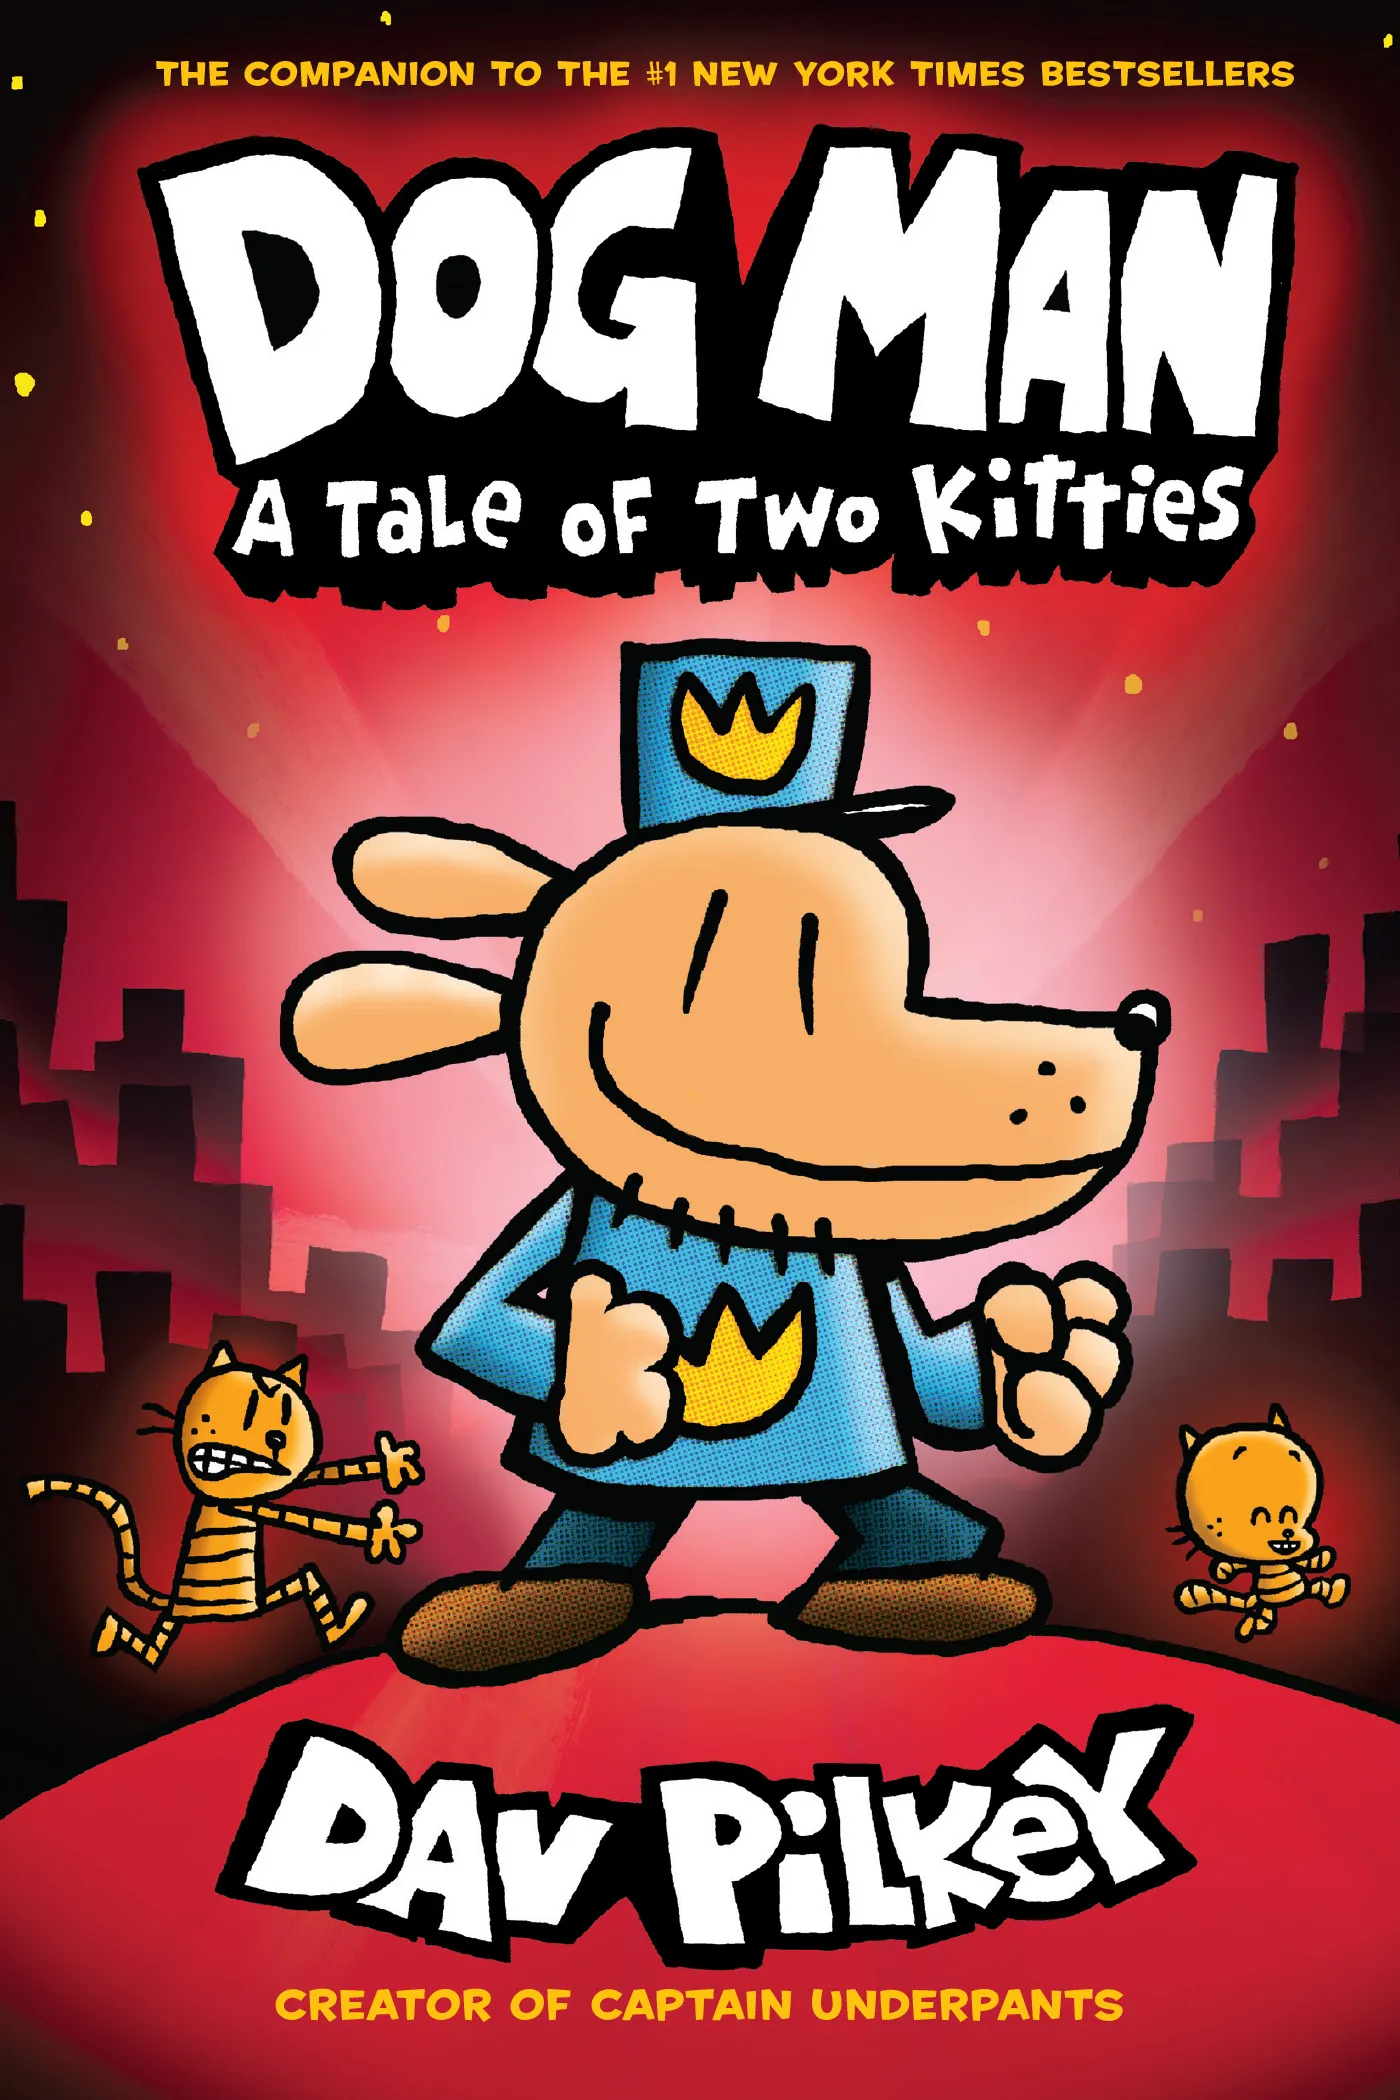 A Tale of Two Kitties: A Graphic Novel (Dog Man #3)